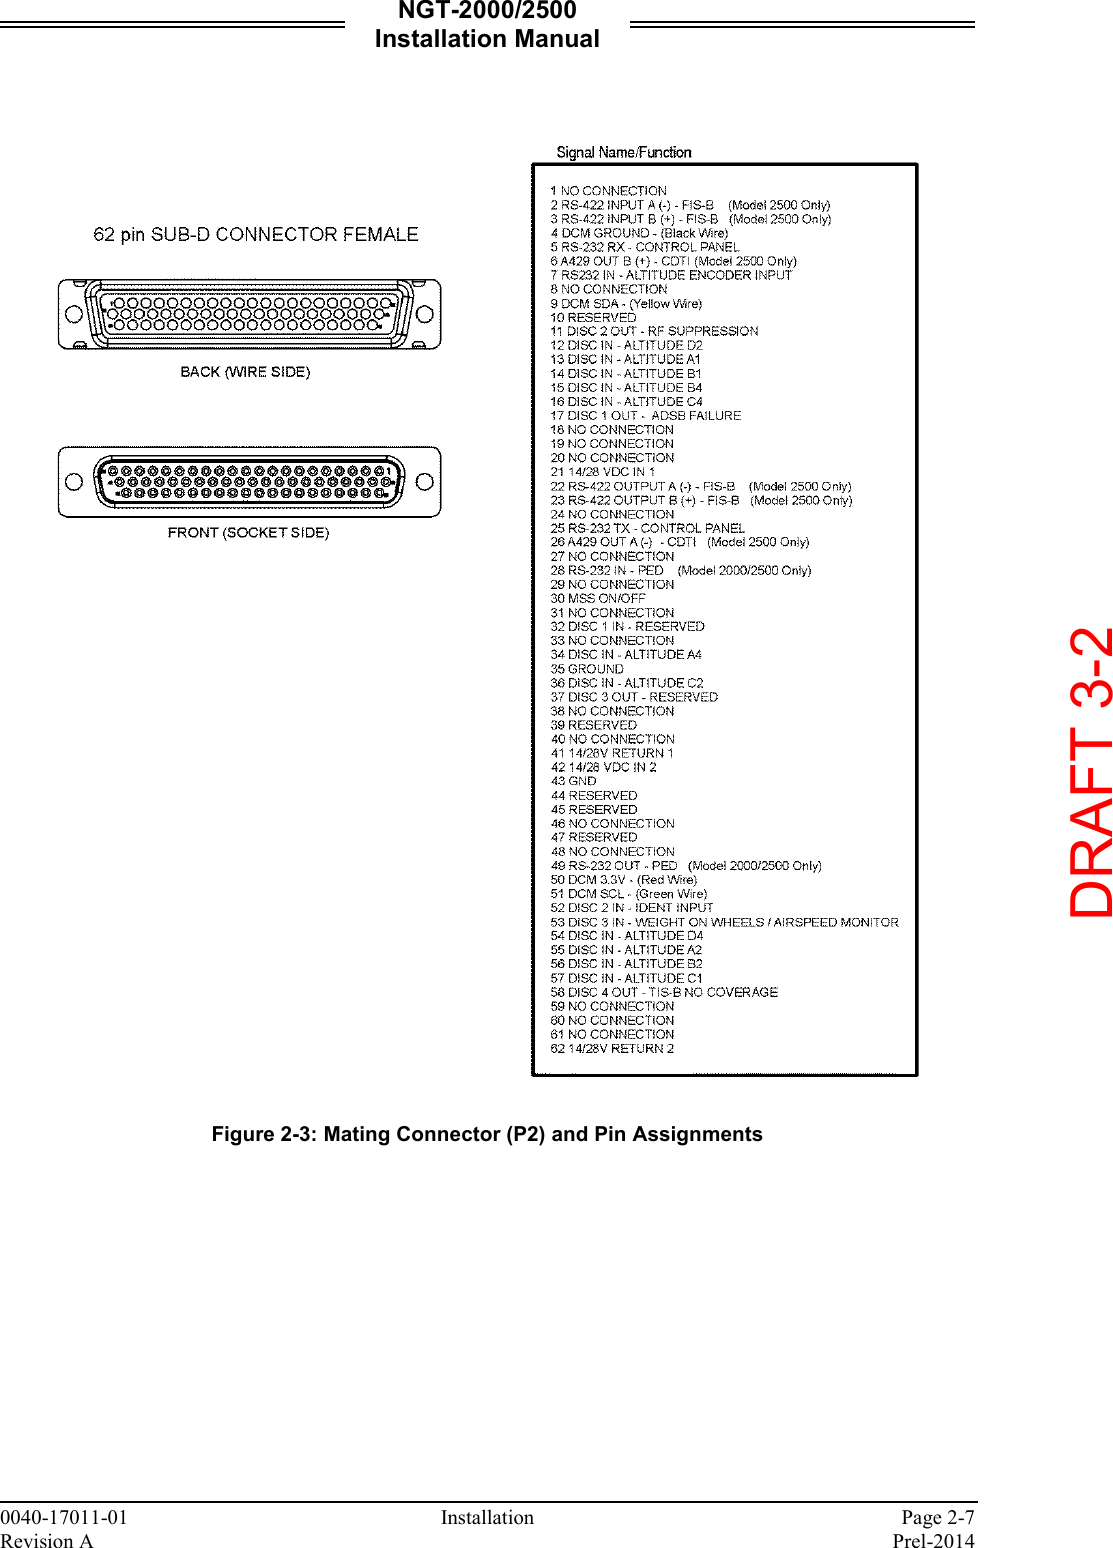 NGT-2000/2500 Installation Manual  0040-17011-01    Installation  Page 2-7 Revision A    Prel-2014     Figure 2-3: Mating Connector (P2) and Pin Assignments    DRAFT 3-2